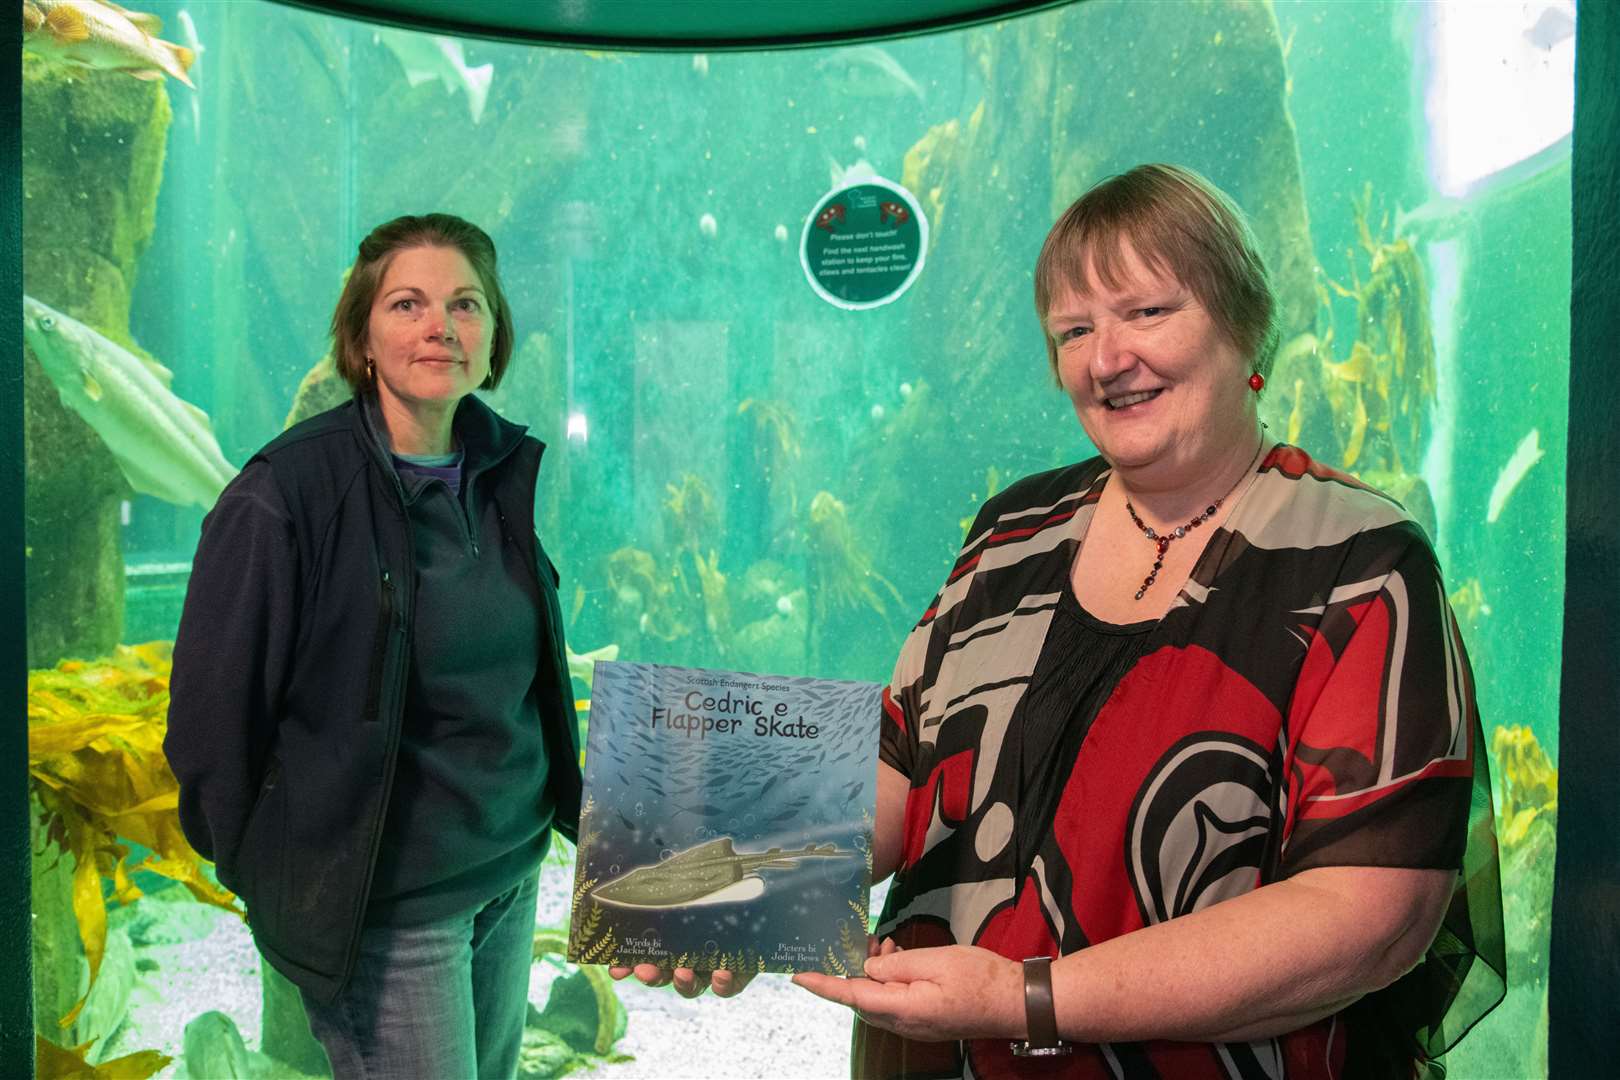 Macduff Marine Aquarium learning officer Marie Dare (left) and Jackie Ross (right) author of Cedric e Flapper Skate book which was launched at the visitor attraction. Picture: Daniel Forsyth